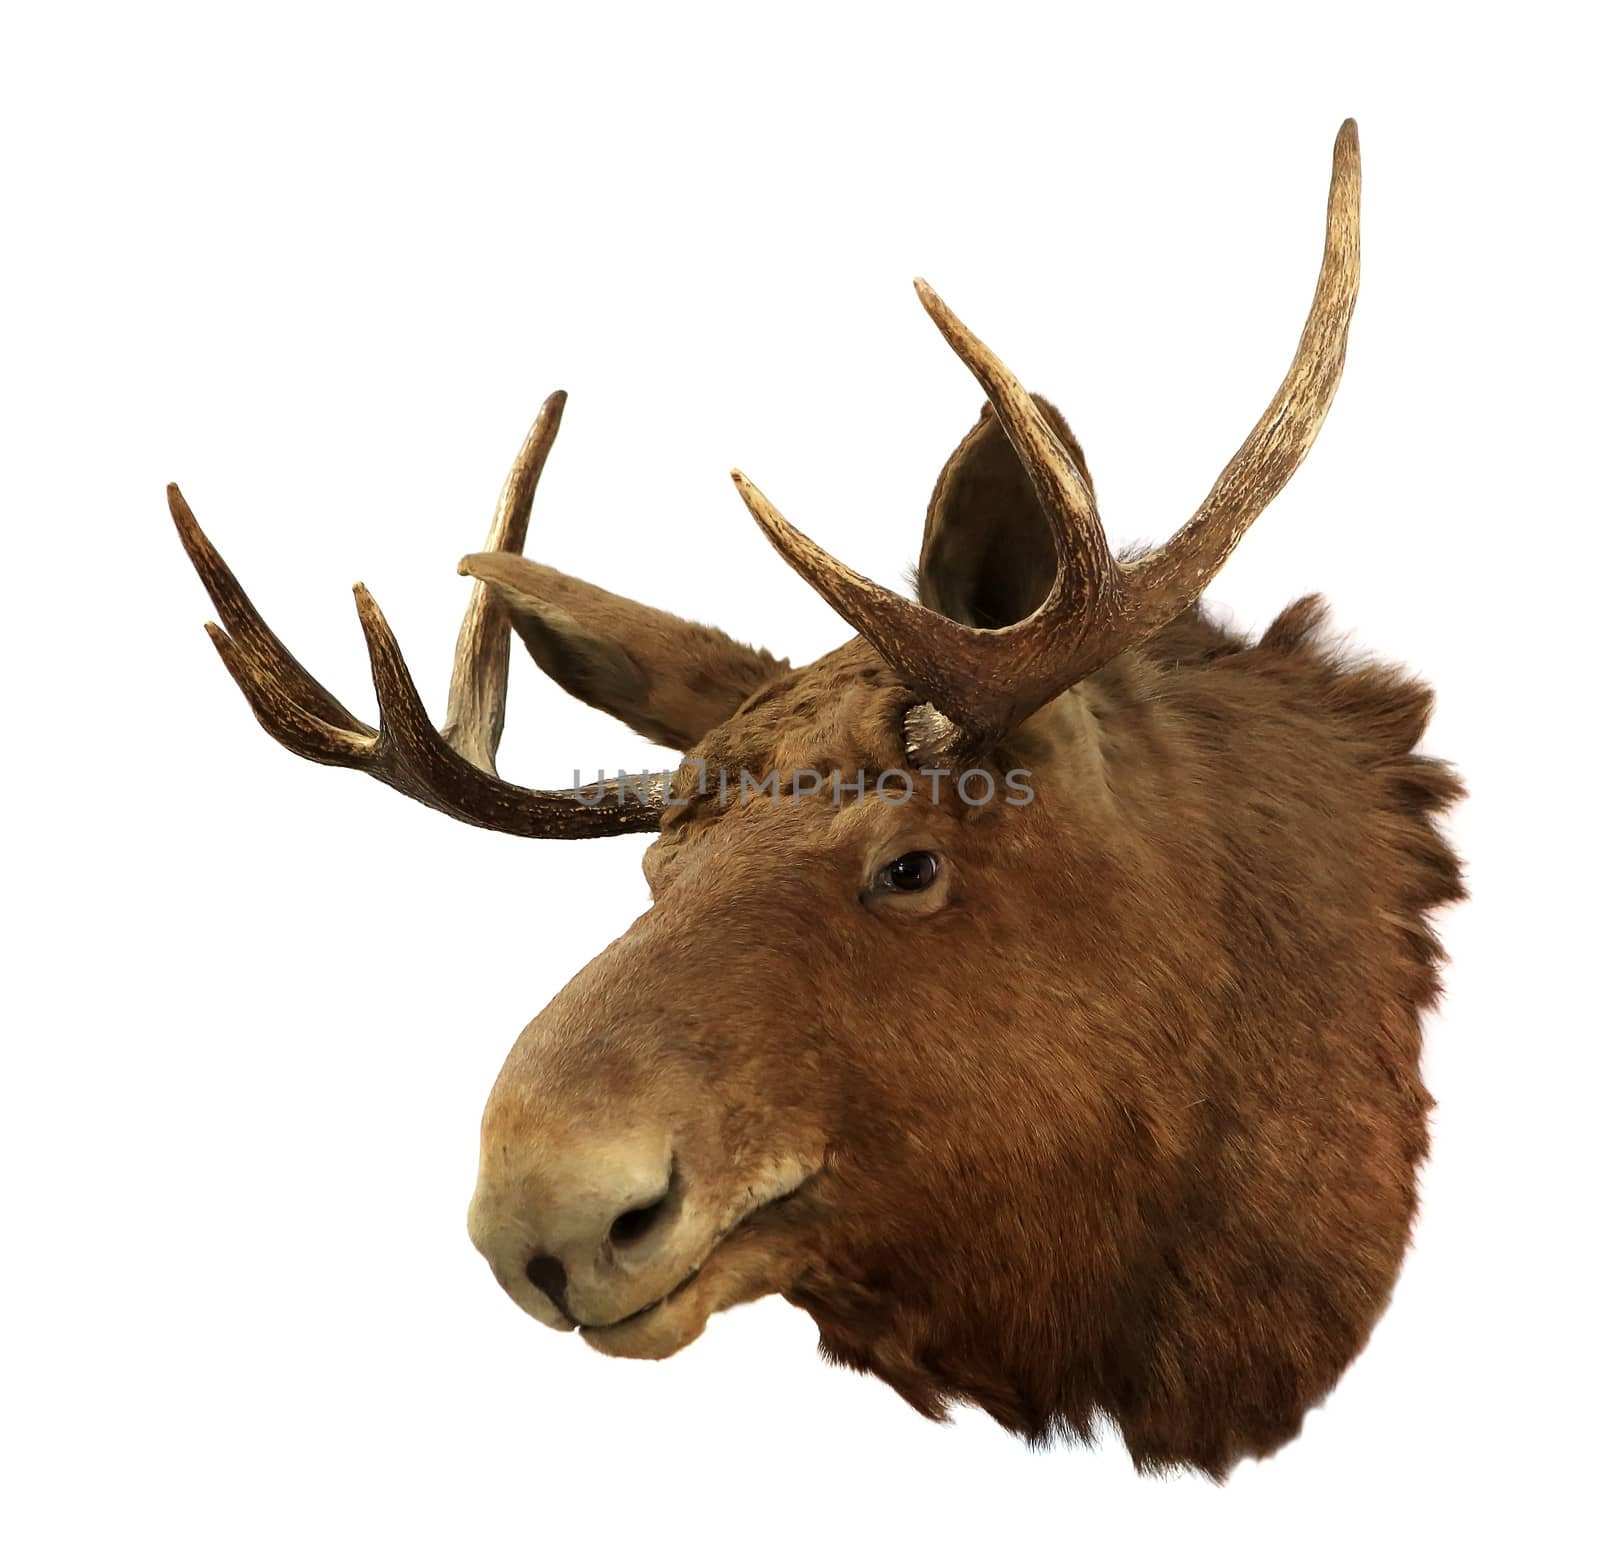 Moose head on a white background (Alces alces), isolated
